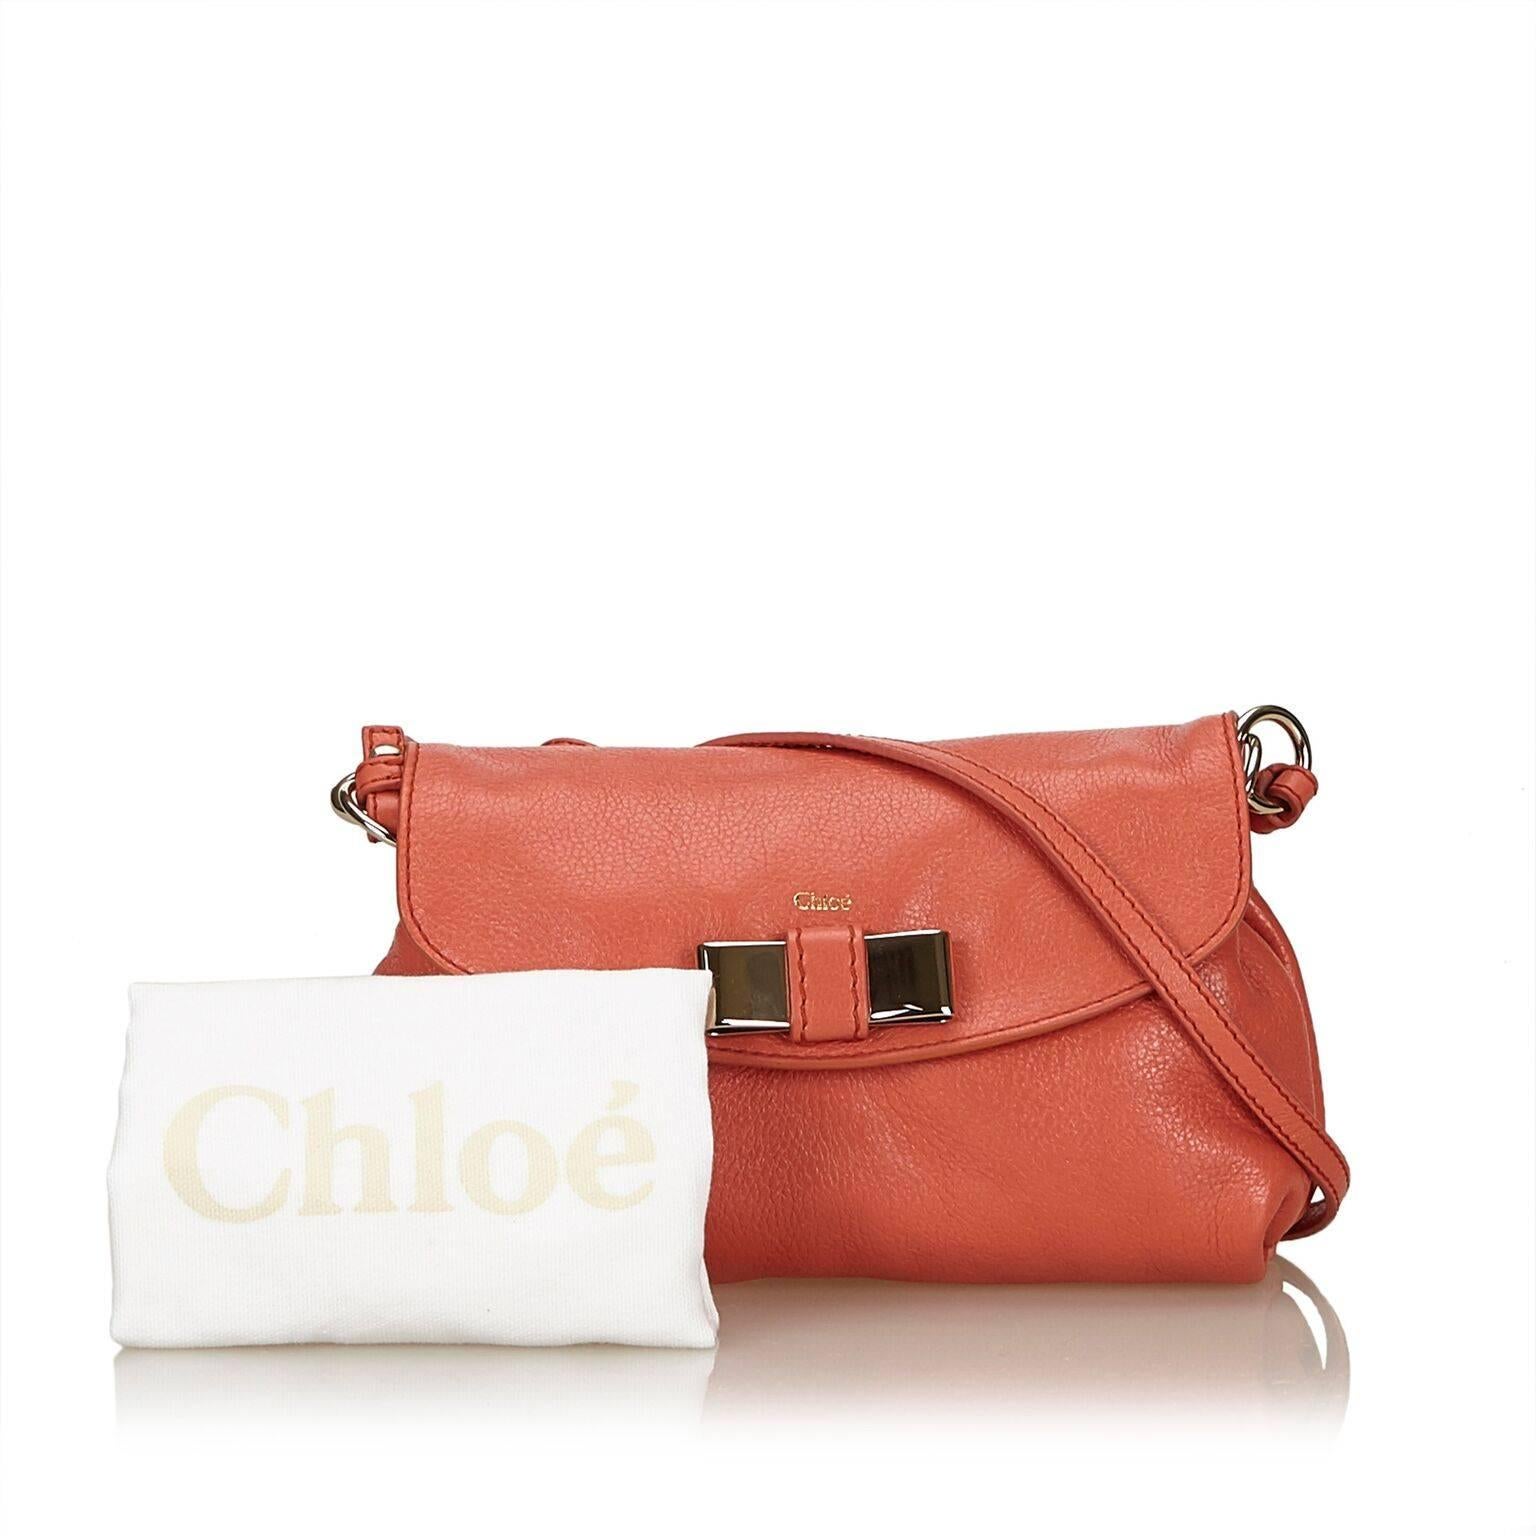 Product details:  Coral leather Lily crossbody bag by Chloe.  Adjustable crossbody strap.  Metal bow accents front flap.  Concealed magnetic snap closure.  Lined interior with inner slide pocket.  Silvertone hardware.  Dust bag included.  8